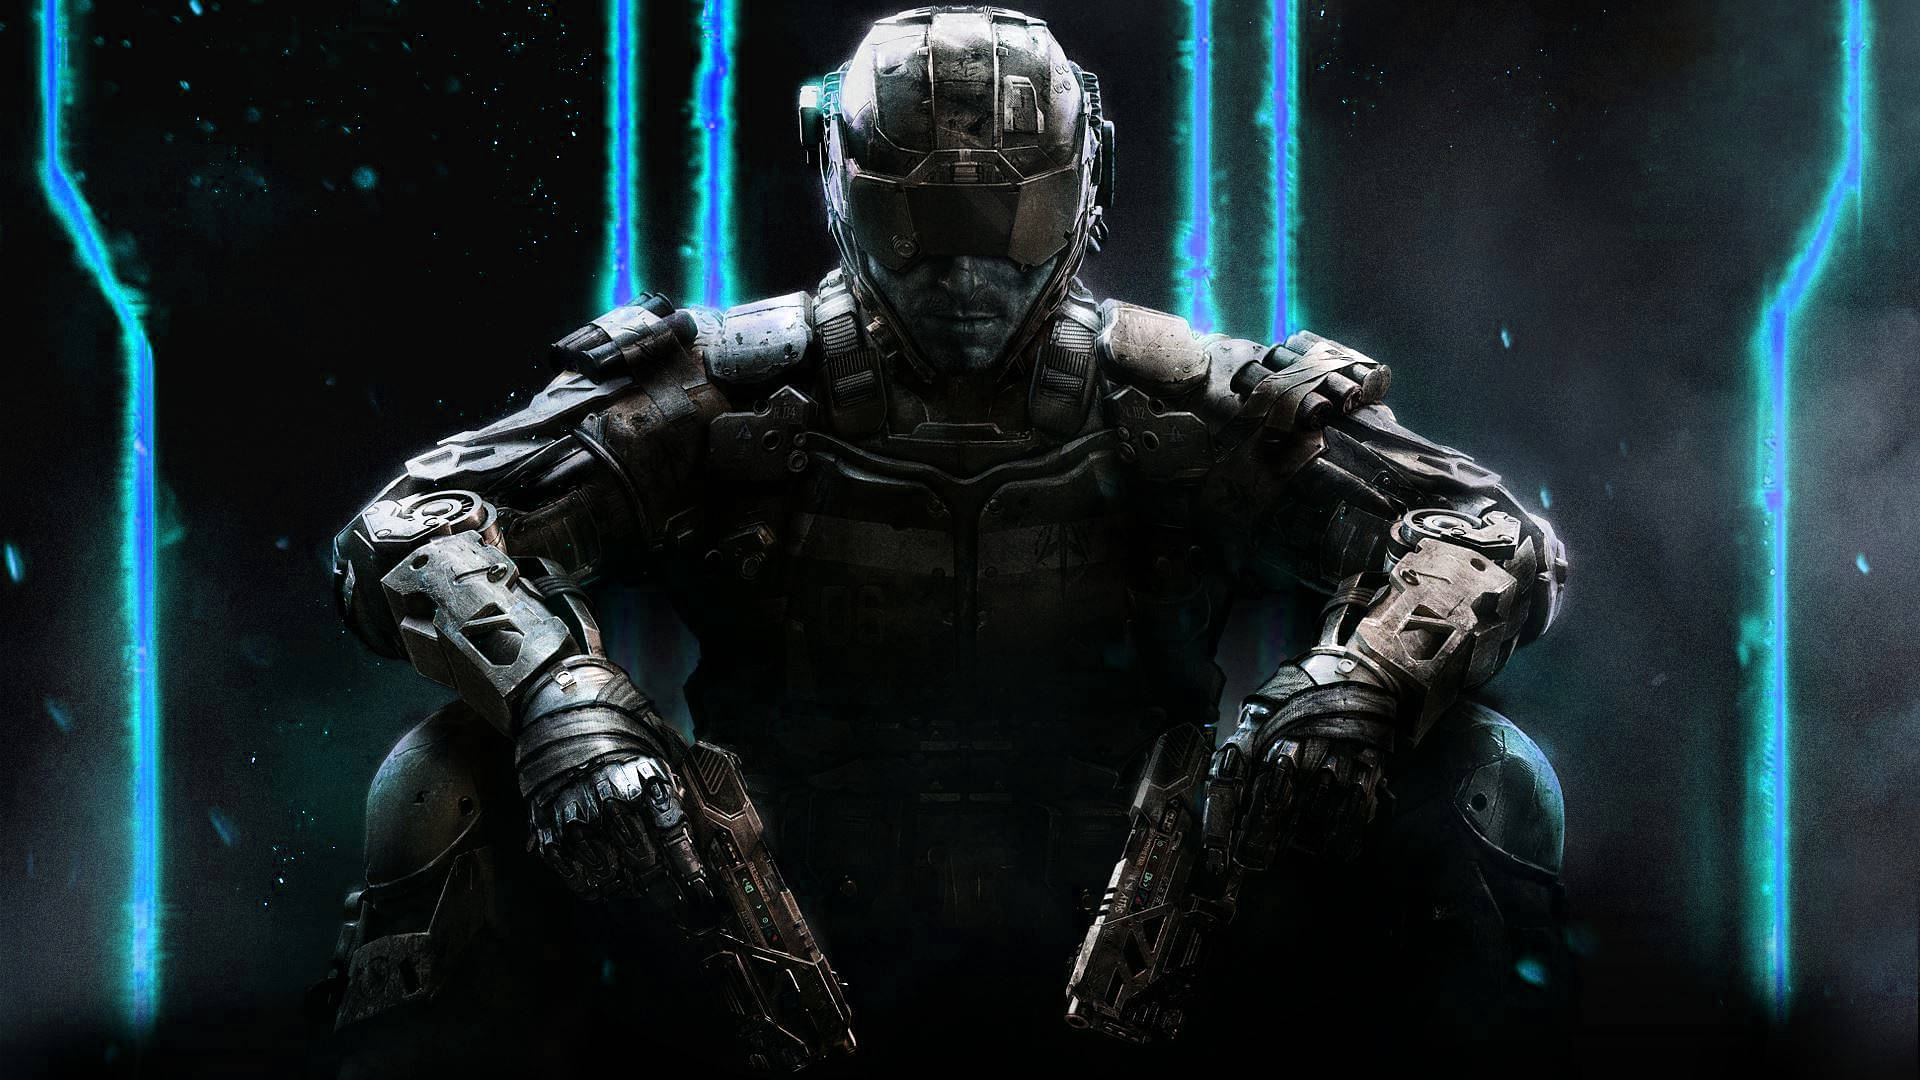 An image showing Call of Duty Black Ops cover in blue which can be released in 2025